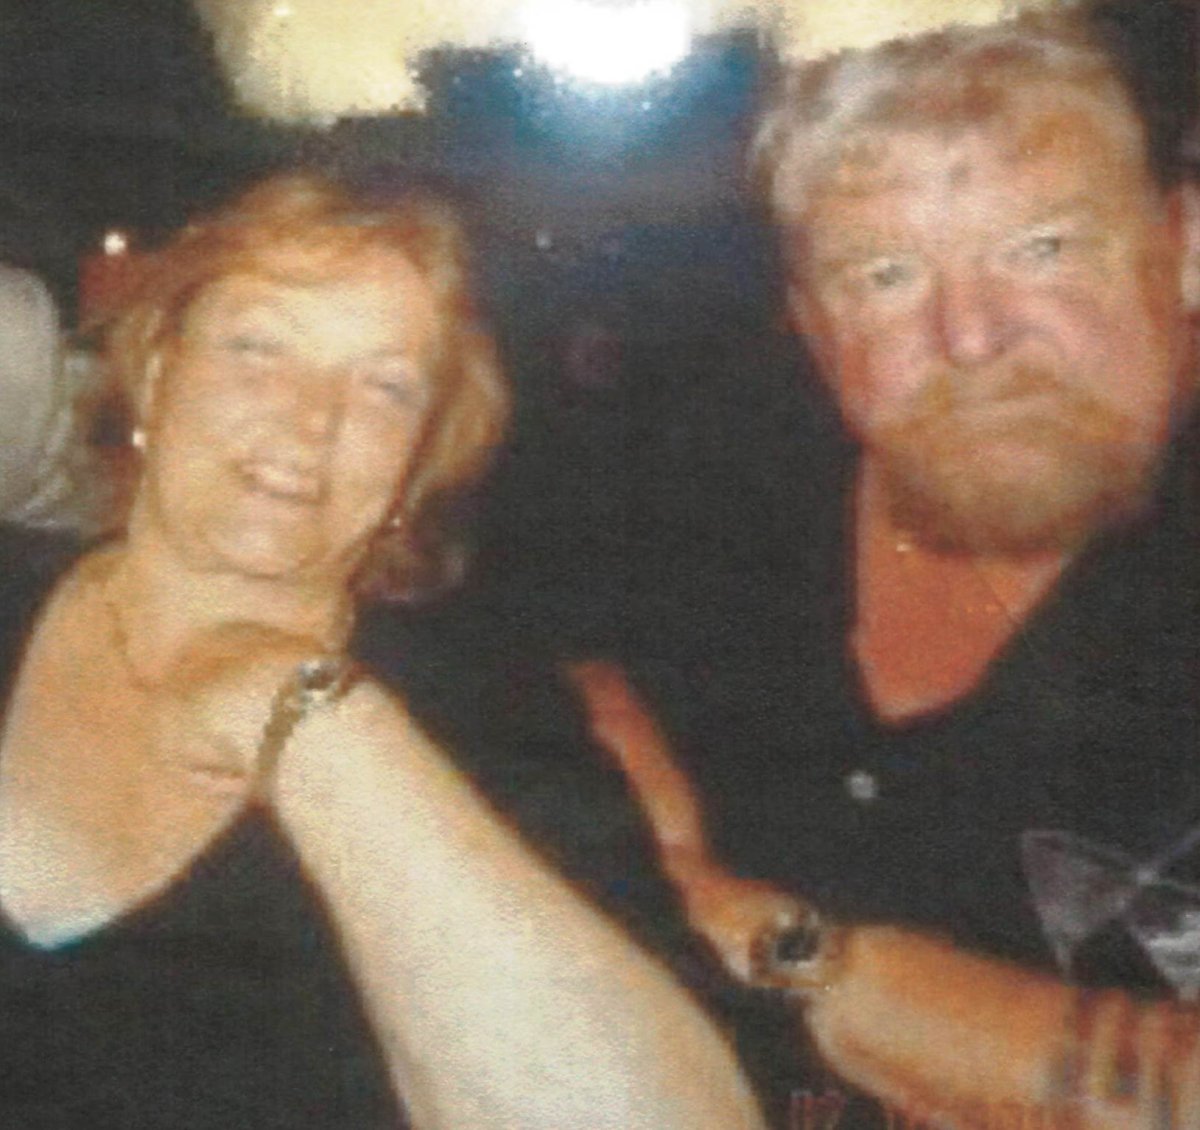 Holli Asher, 74, and her partner Thomas Bories, 64, were last seen by friends on Tuesday, April 5, after returning home from a vacation. 